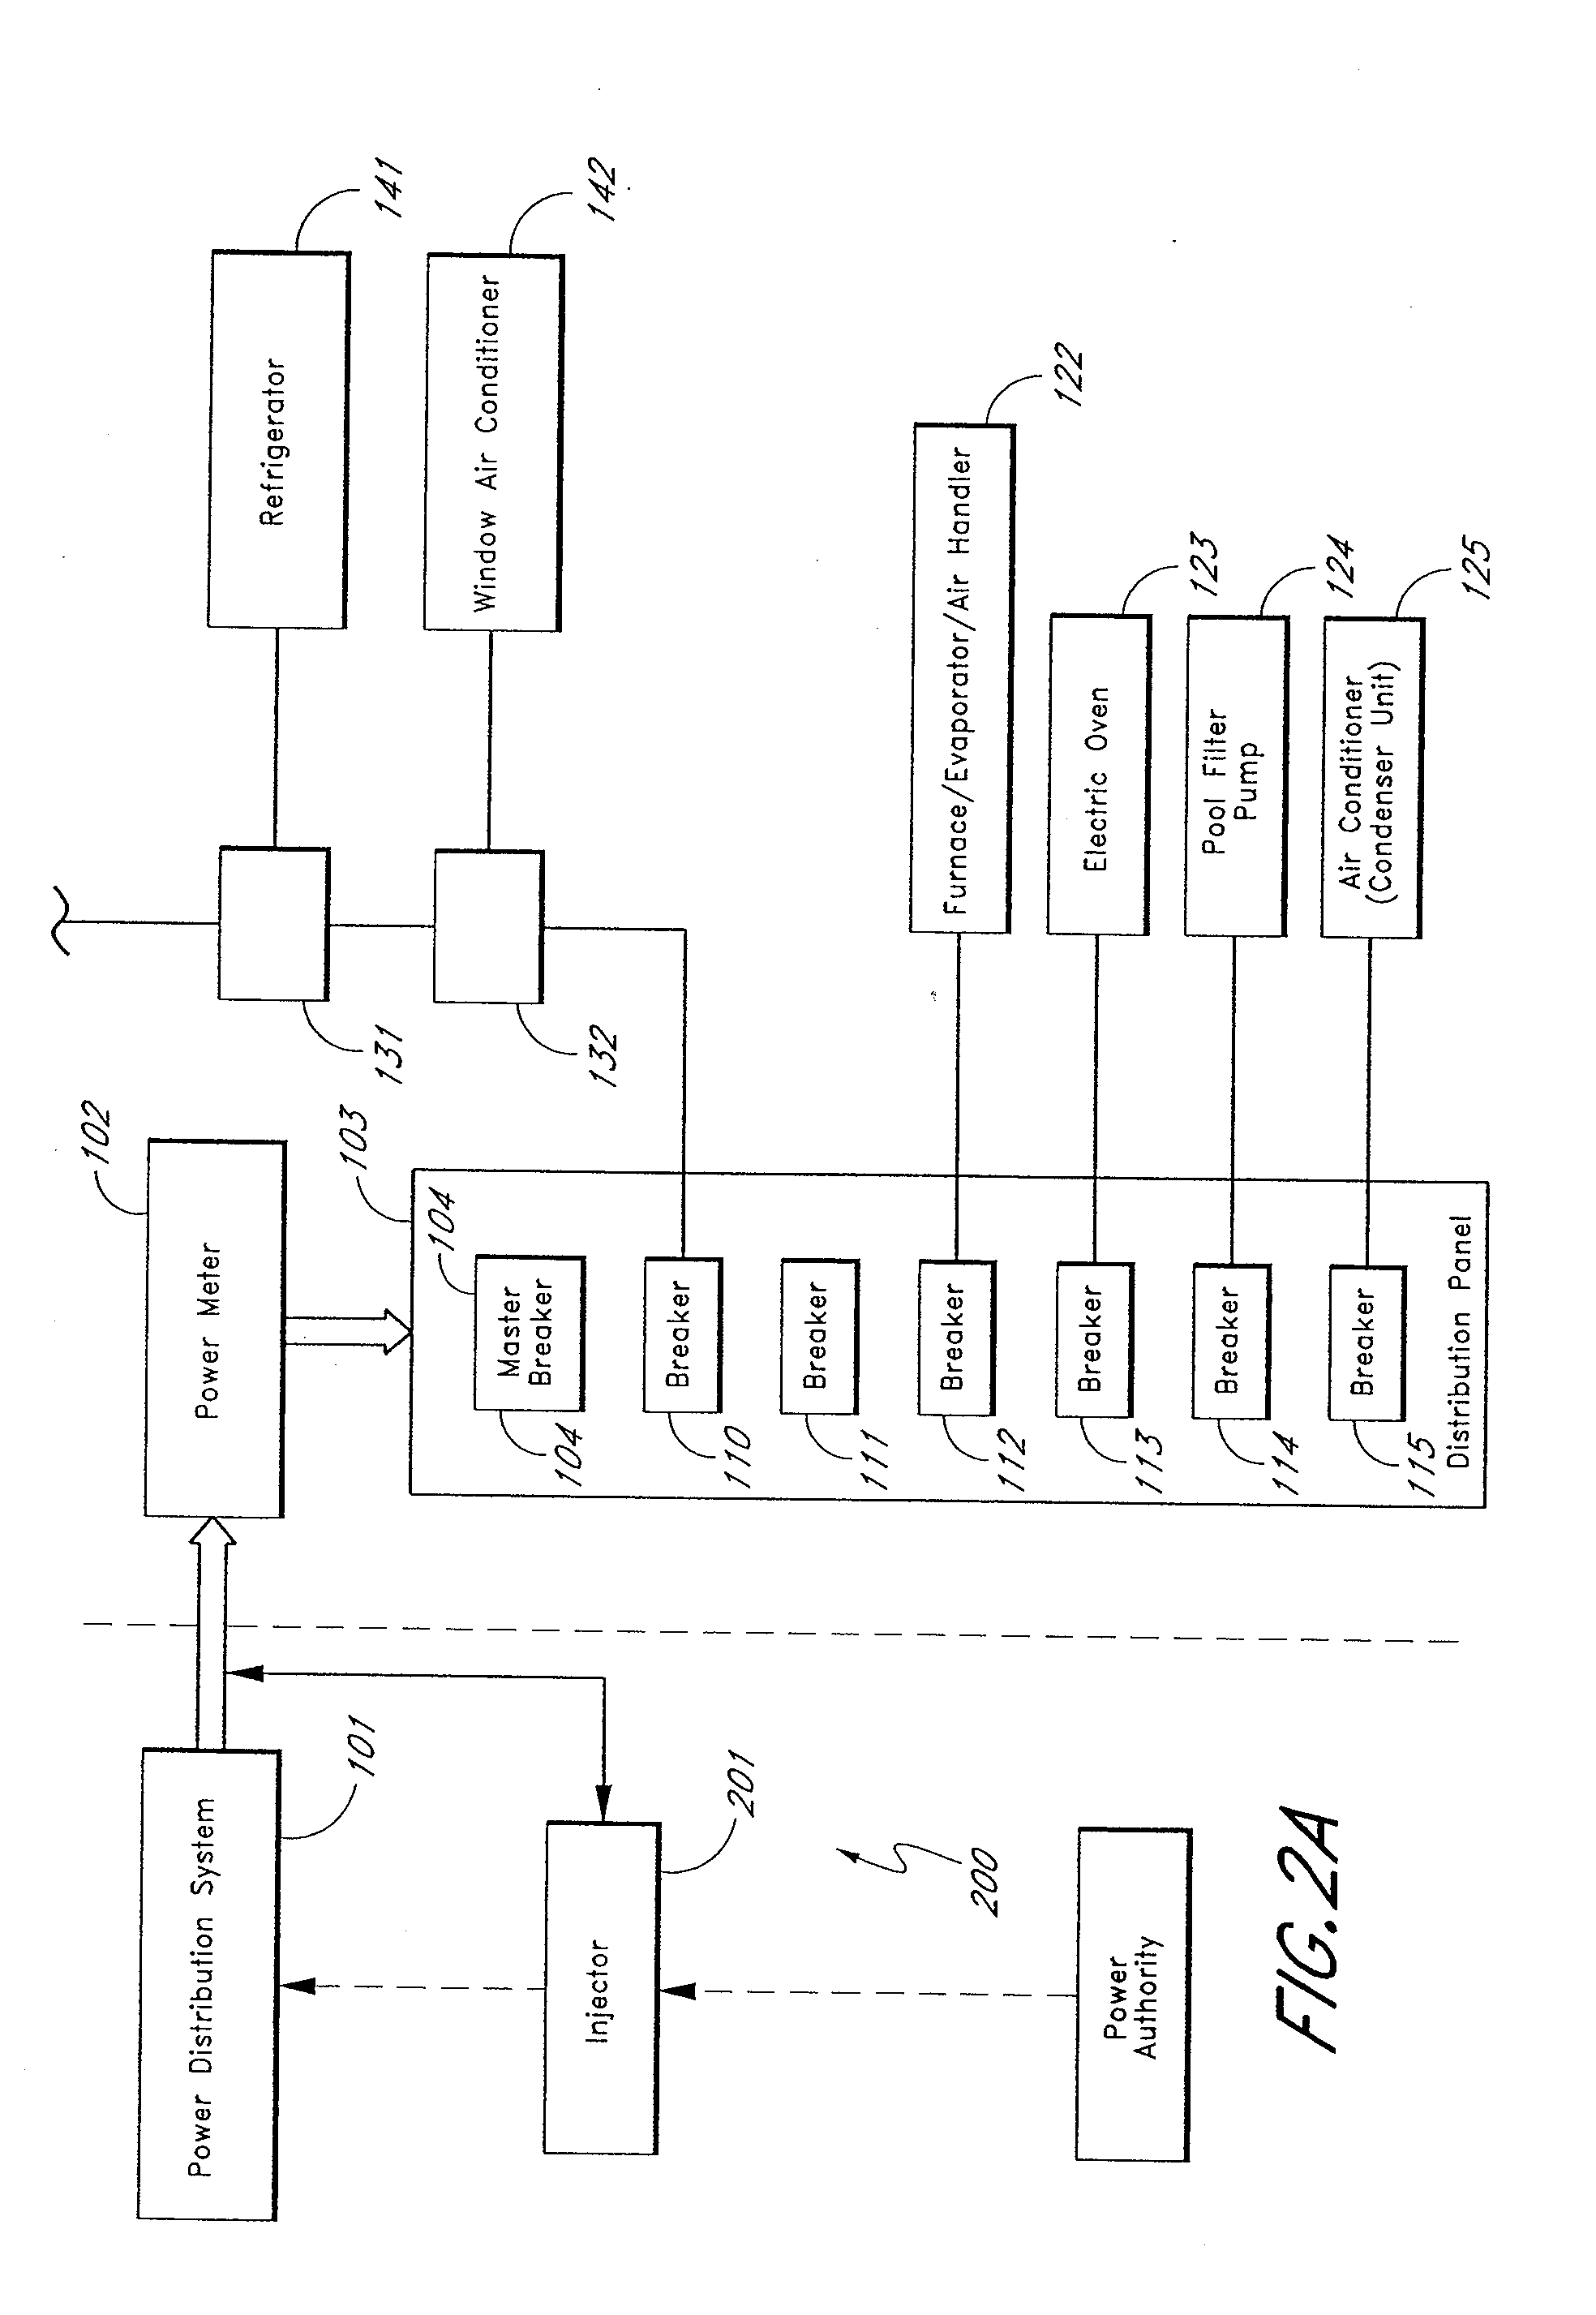 Method and apparatus for temperature-based load management metering in an electric power system